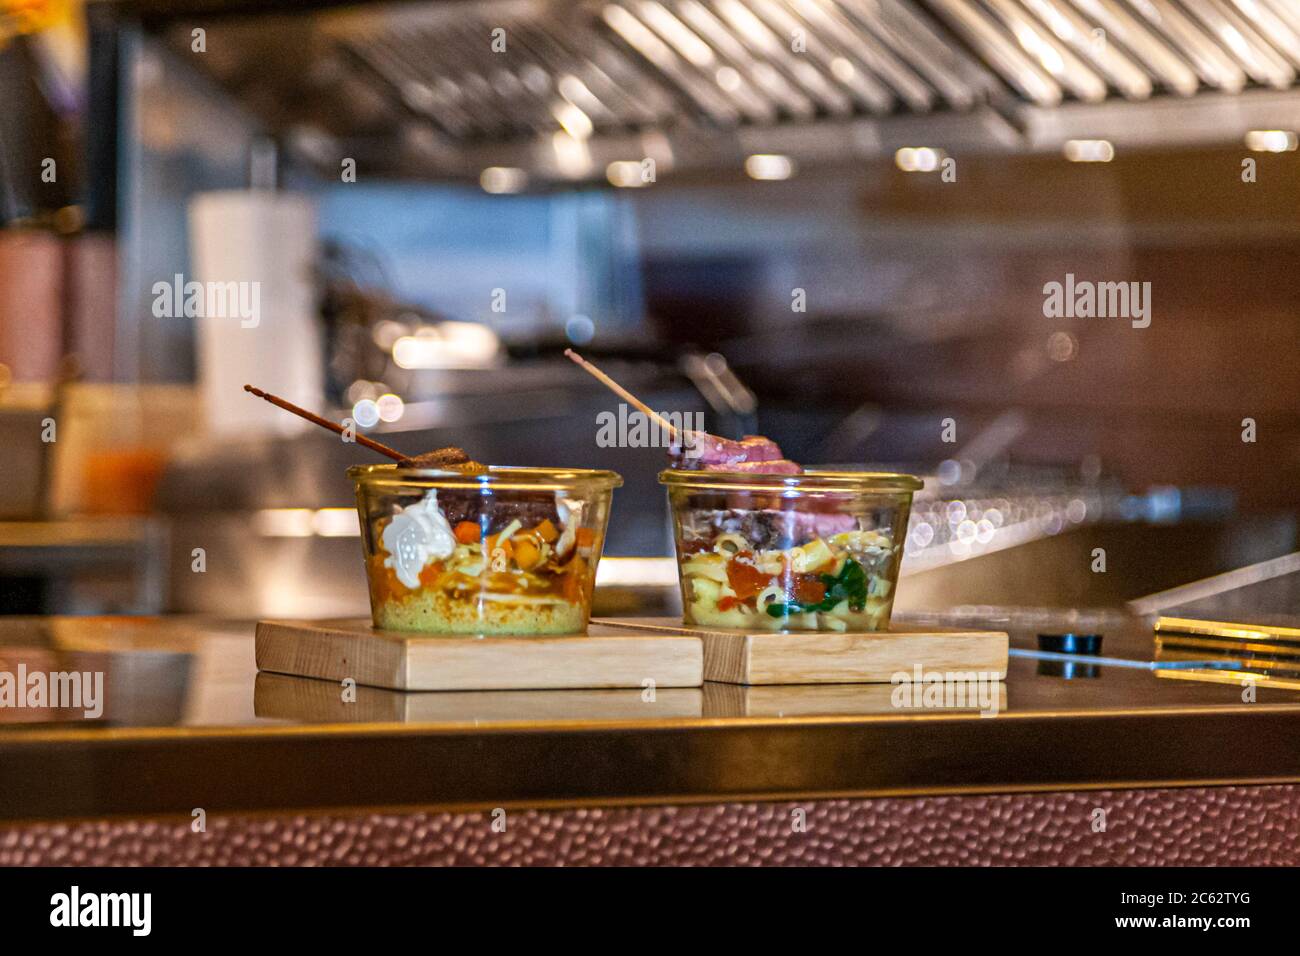 This latest culinary offshoot has been at Hotel Freiberg since January 2016. With Fetzwerk, the hotel is able to offer hotel guests and visitors a meal almost around the clock. Breakfast is available until 12 o'clock, after which there is food from the jar of wafers. Oberstdorf, Germany Stock Photo